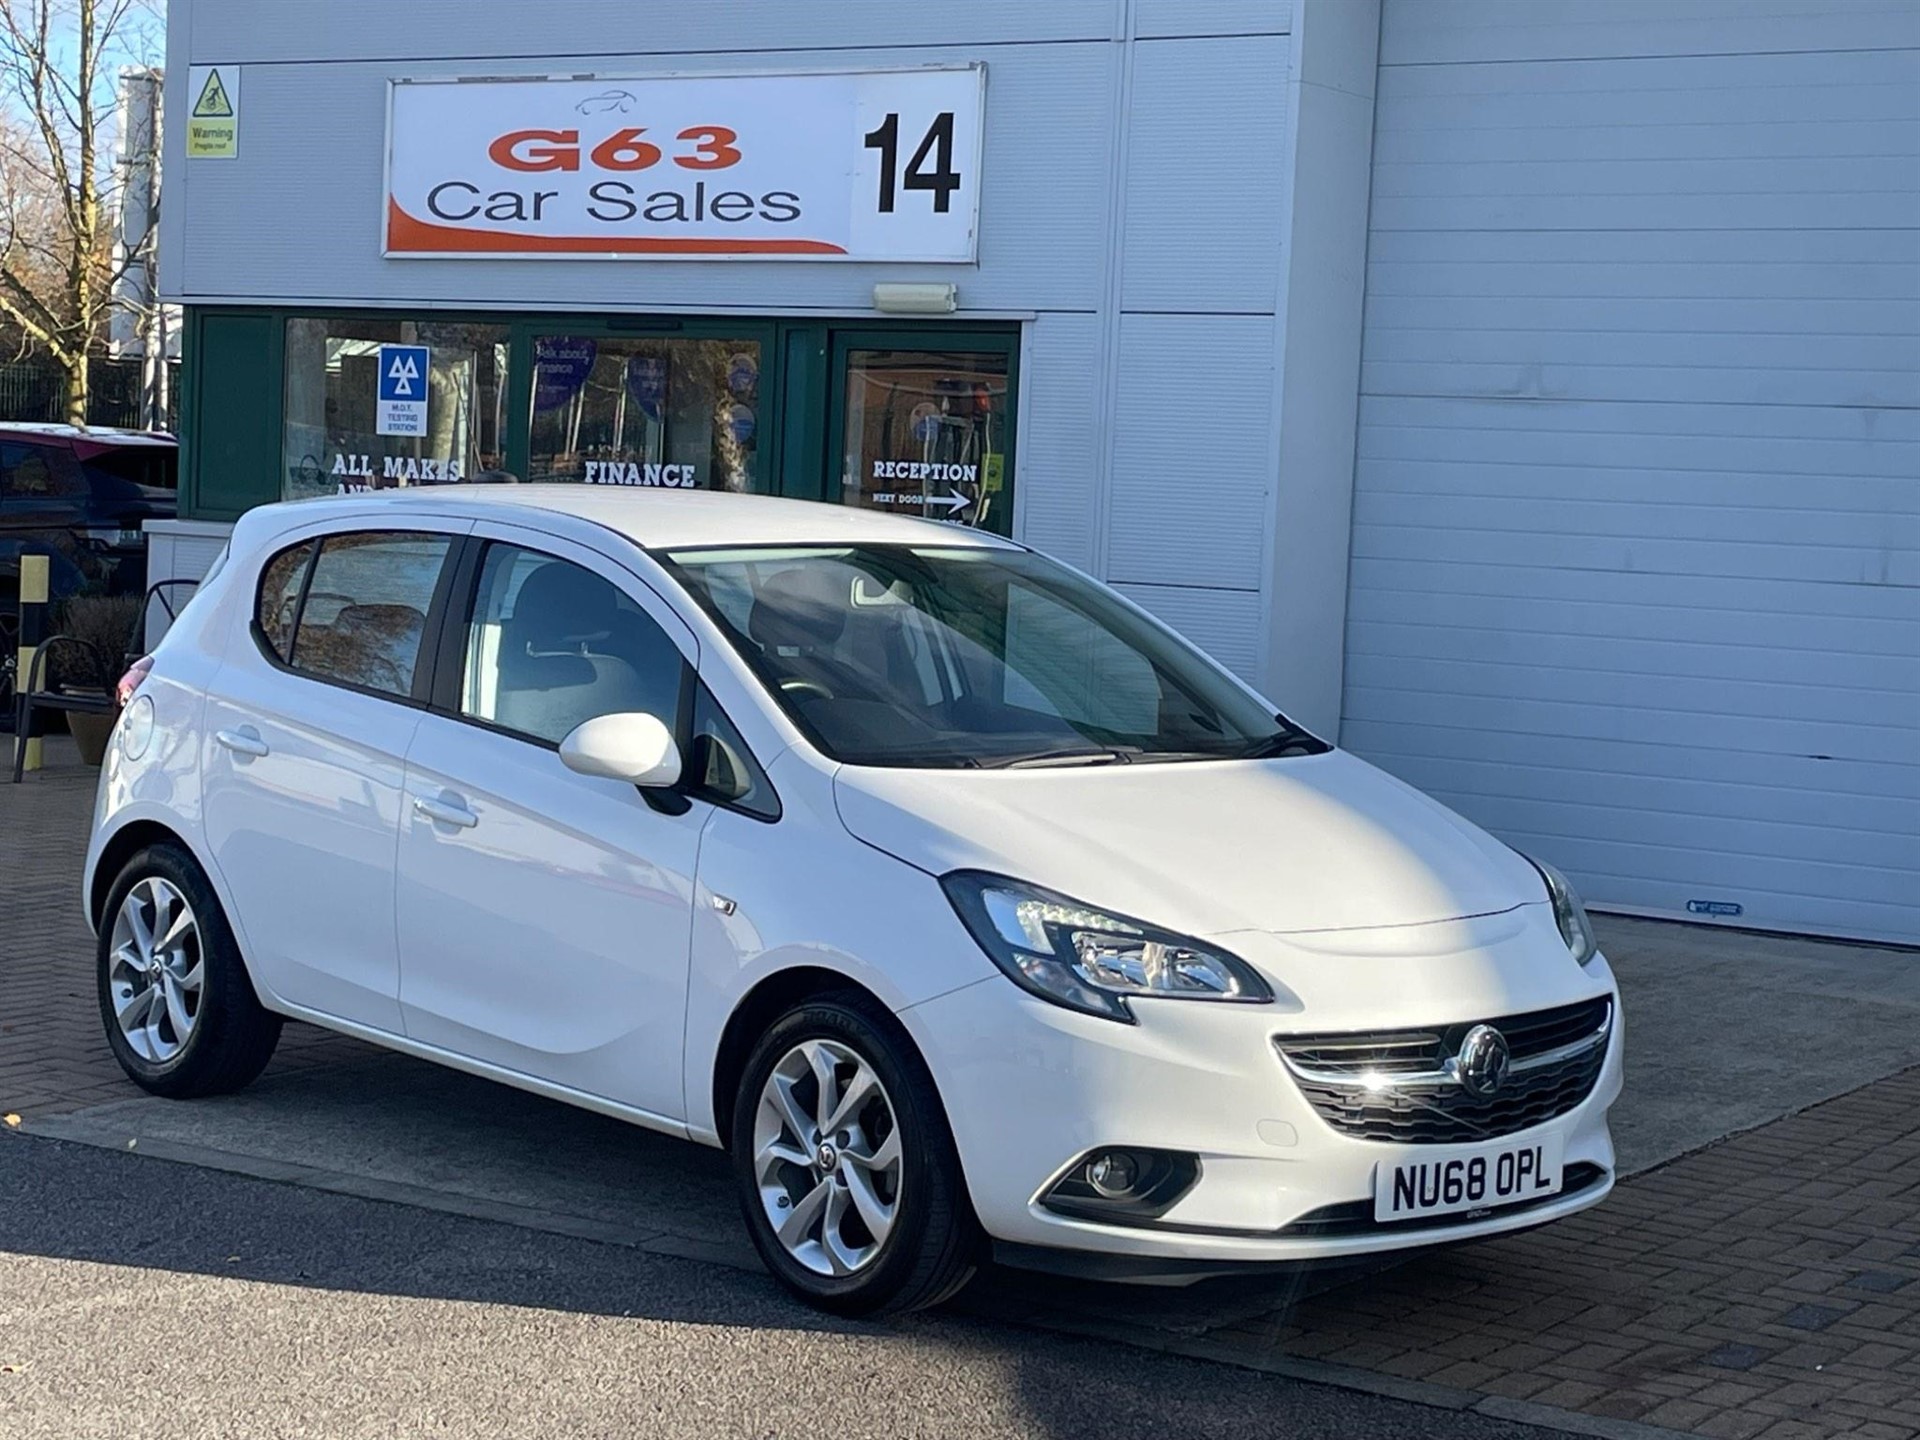 Used Vauxhall Corsa for sale in Leeds, North Yorkshire